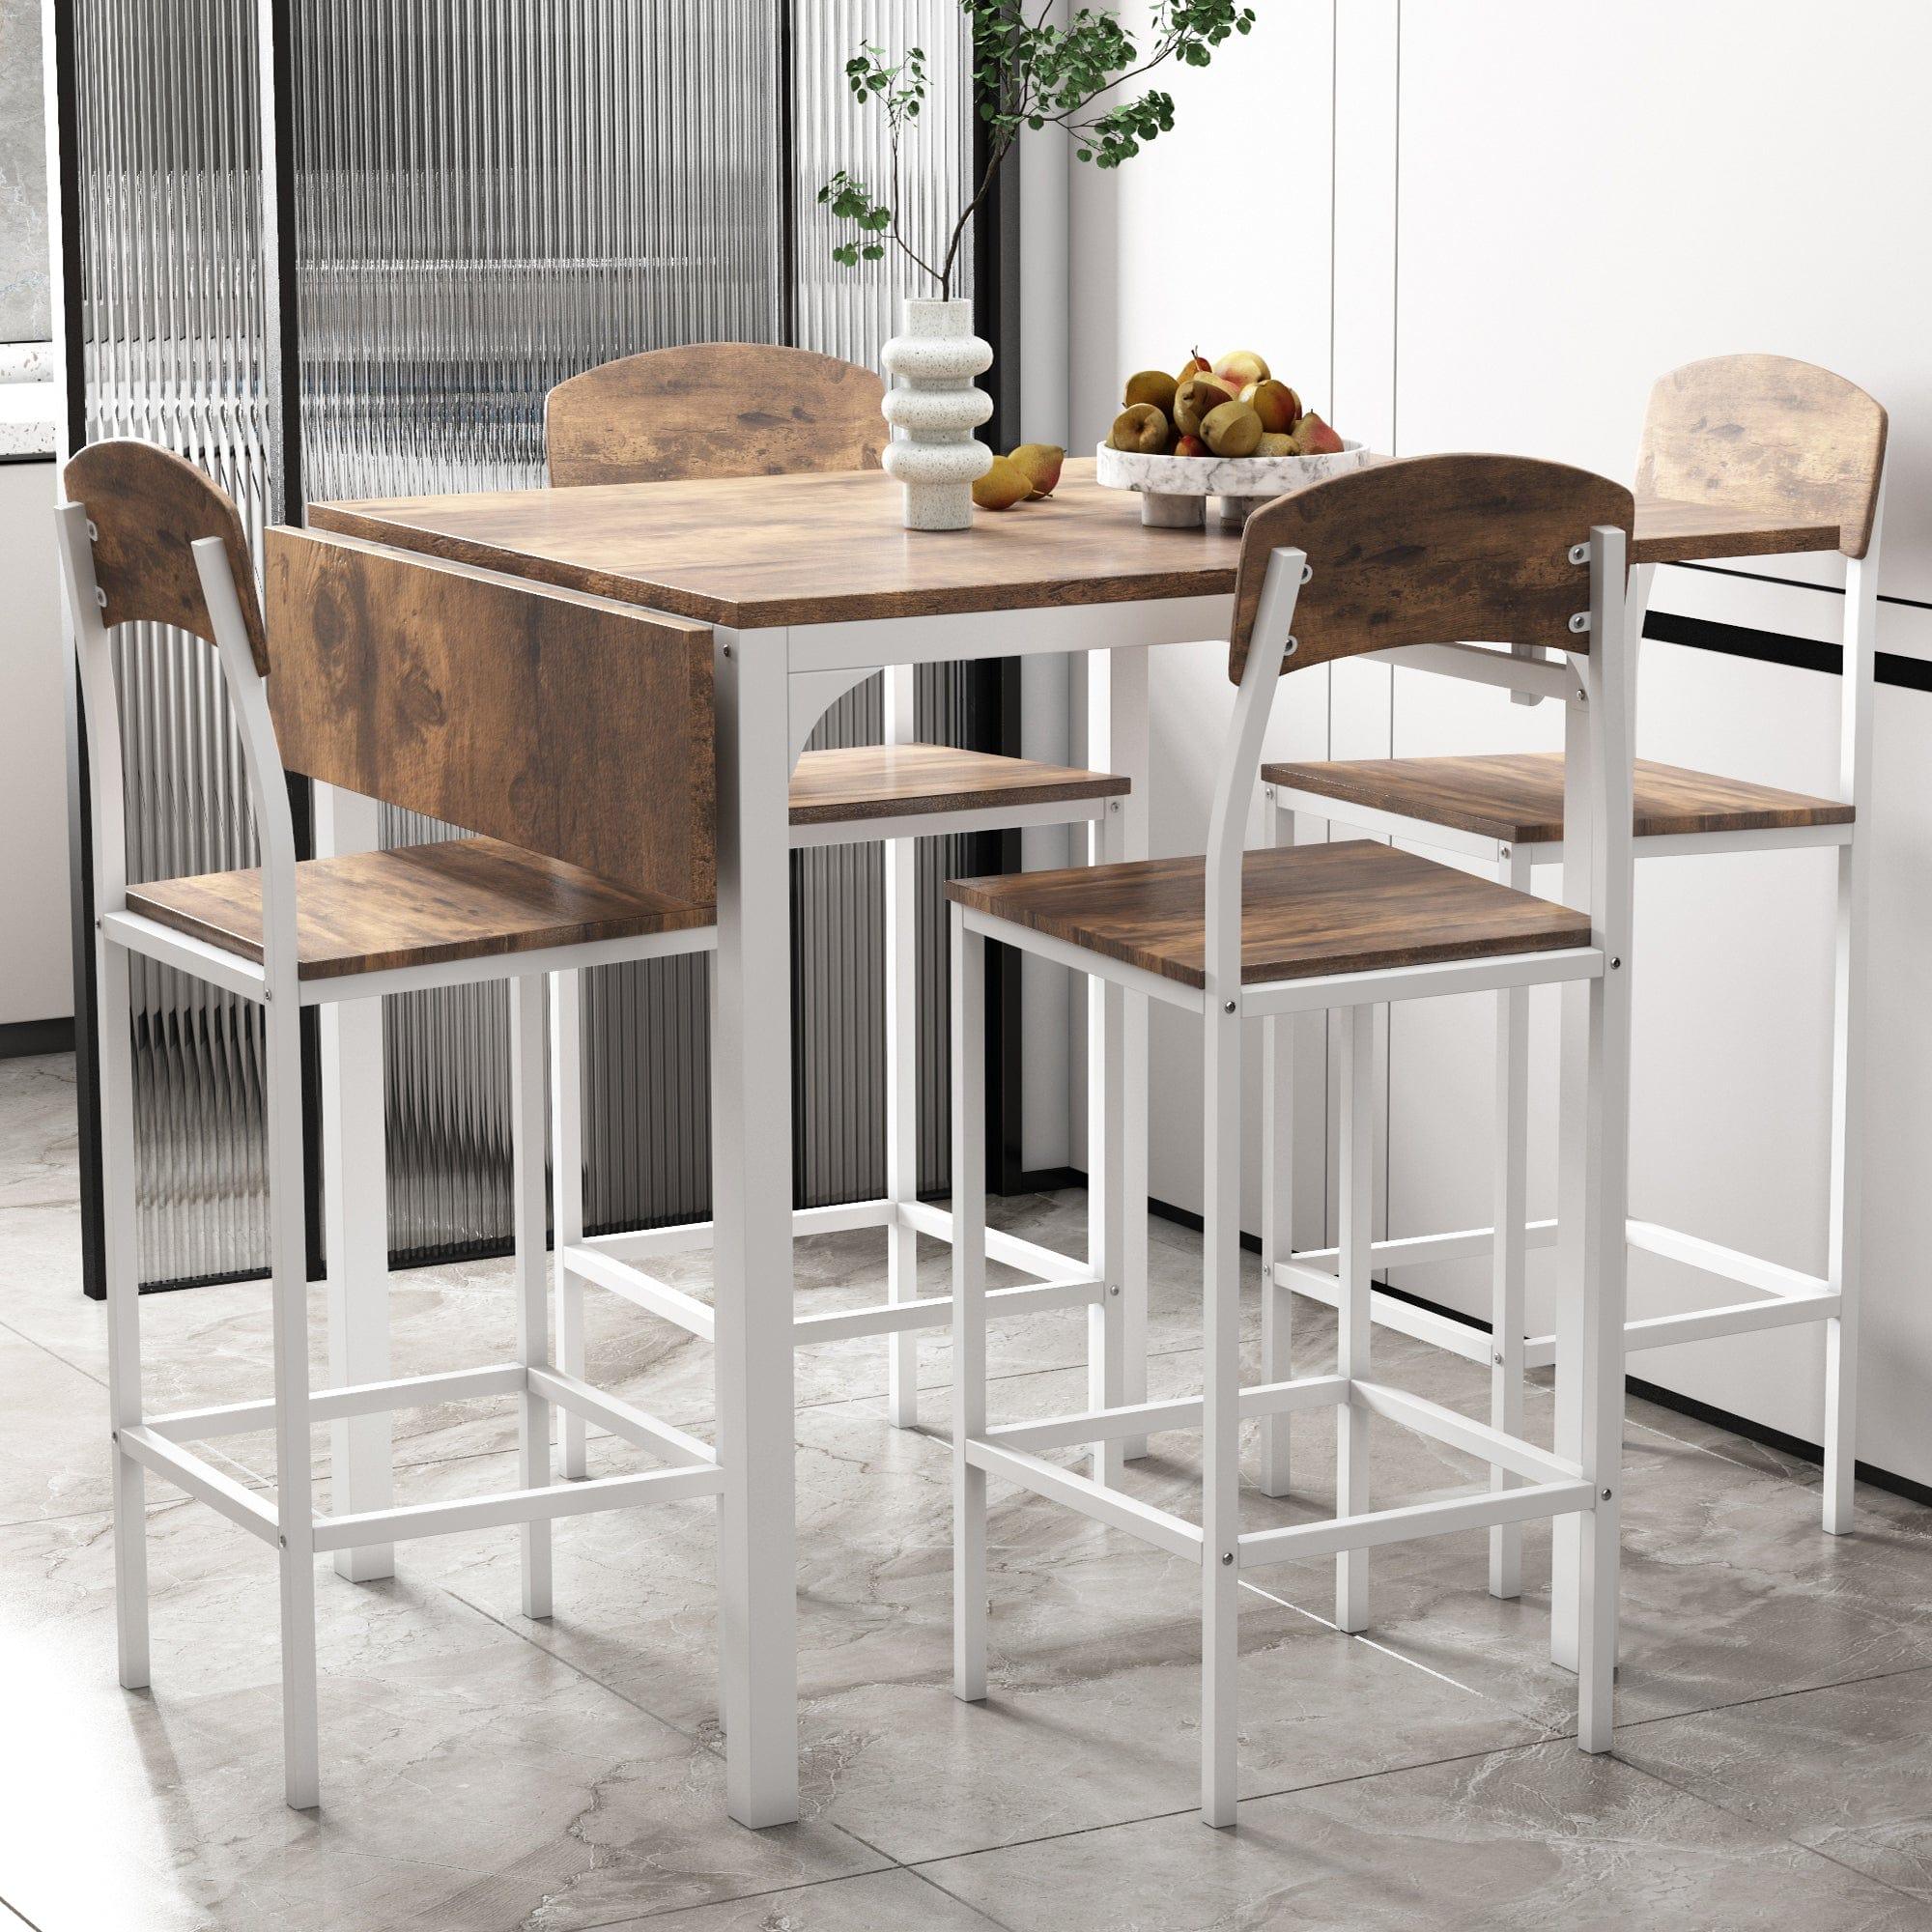 Shop Barcelona 4 Seater Dining Table Set Mademoiselle Home Decor